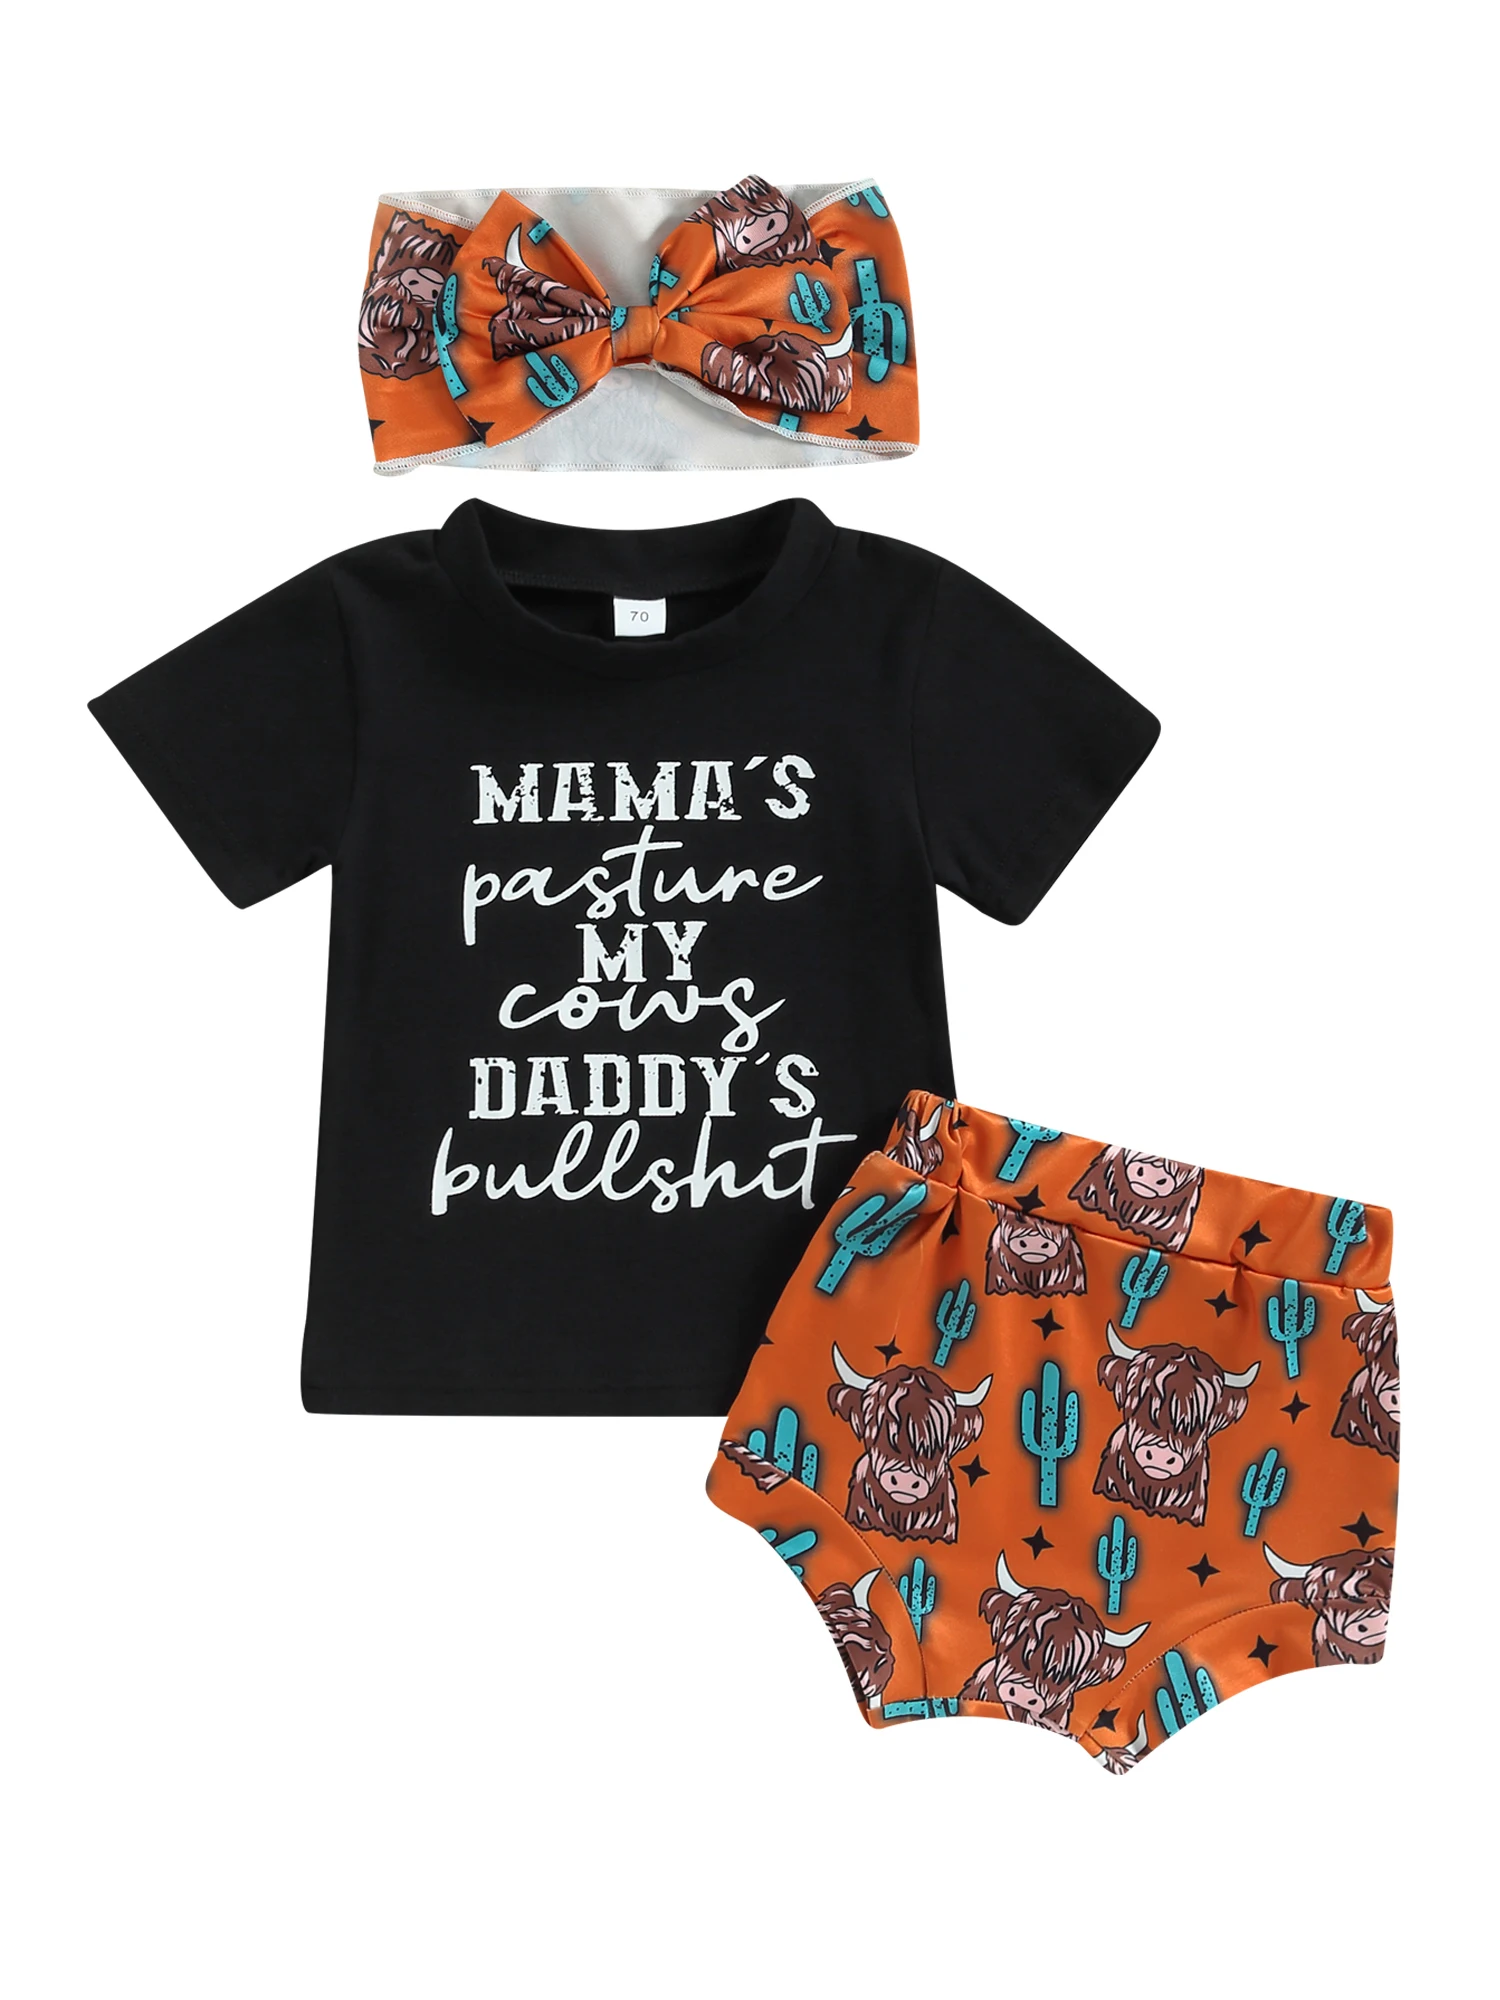 

Baby Girls Shorts Set Short Sleeve Letters Print T-shirt with Cattle Print Shorts and Bowknot Hairband